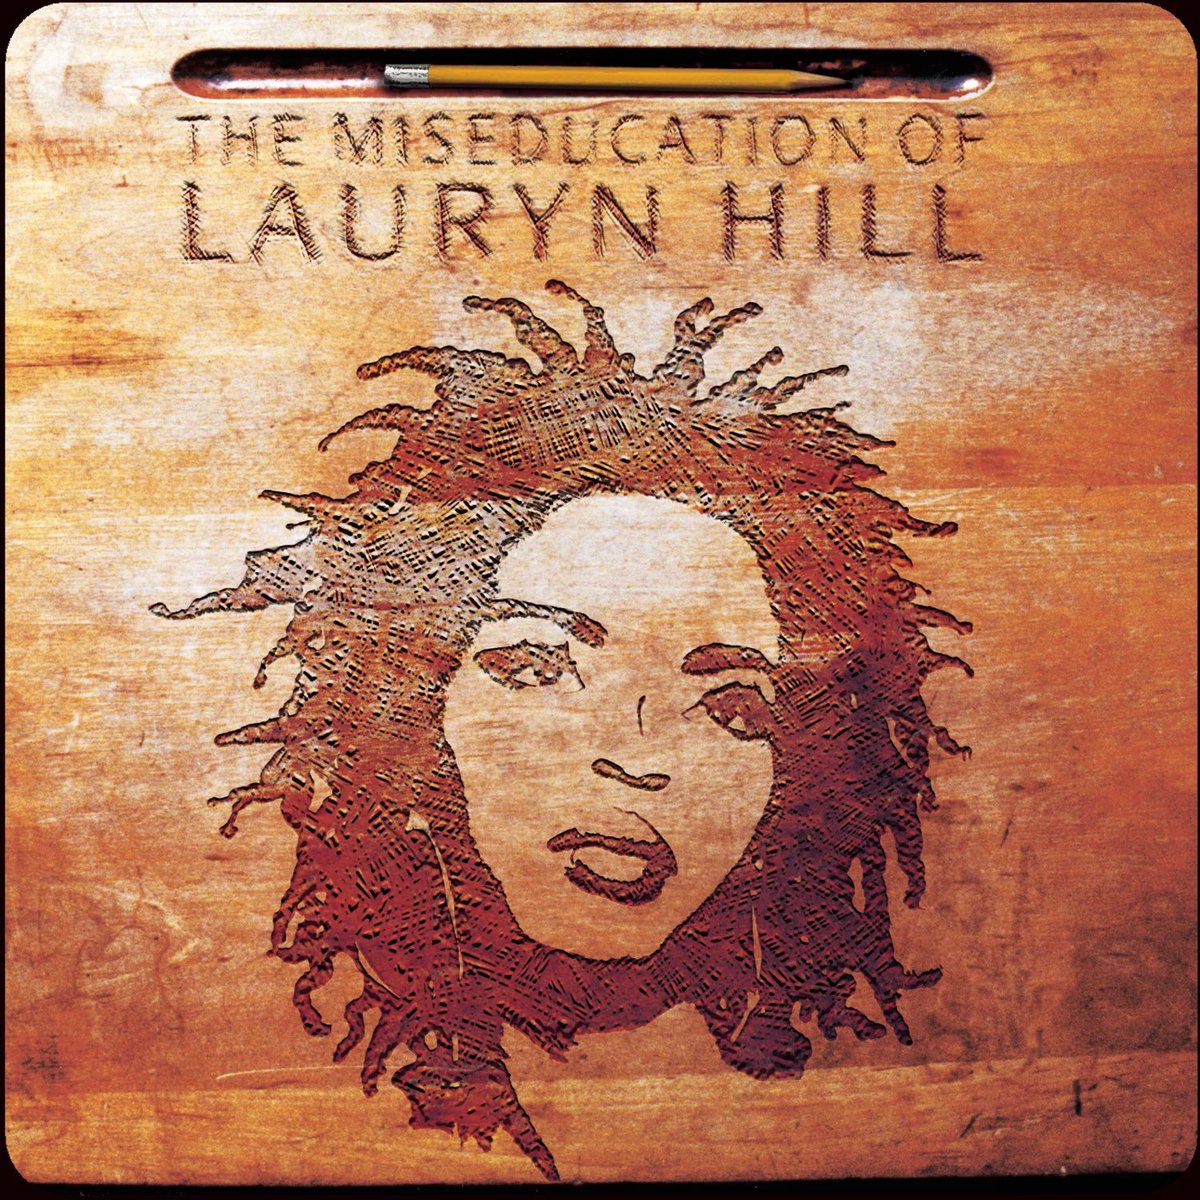 Lauryn Hill’s ‘The Miseducation of Lauryn Hill’ has entered the top 10 on US iTunes following Apple Music’s “100 Best Albums” list 💕